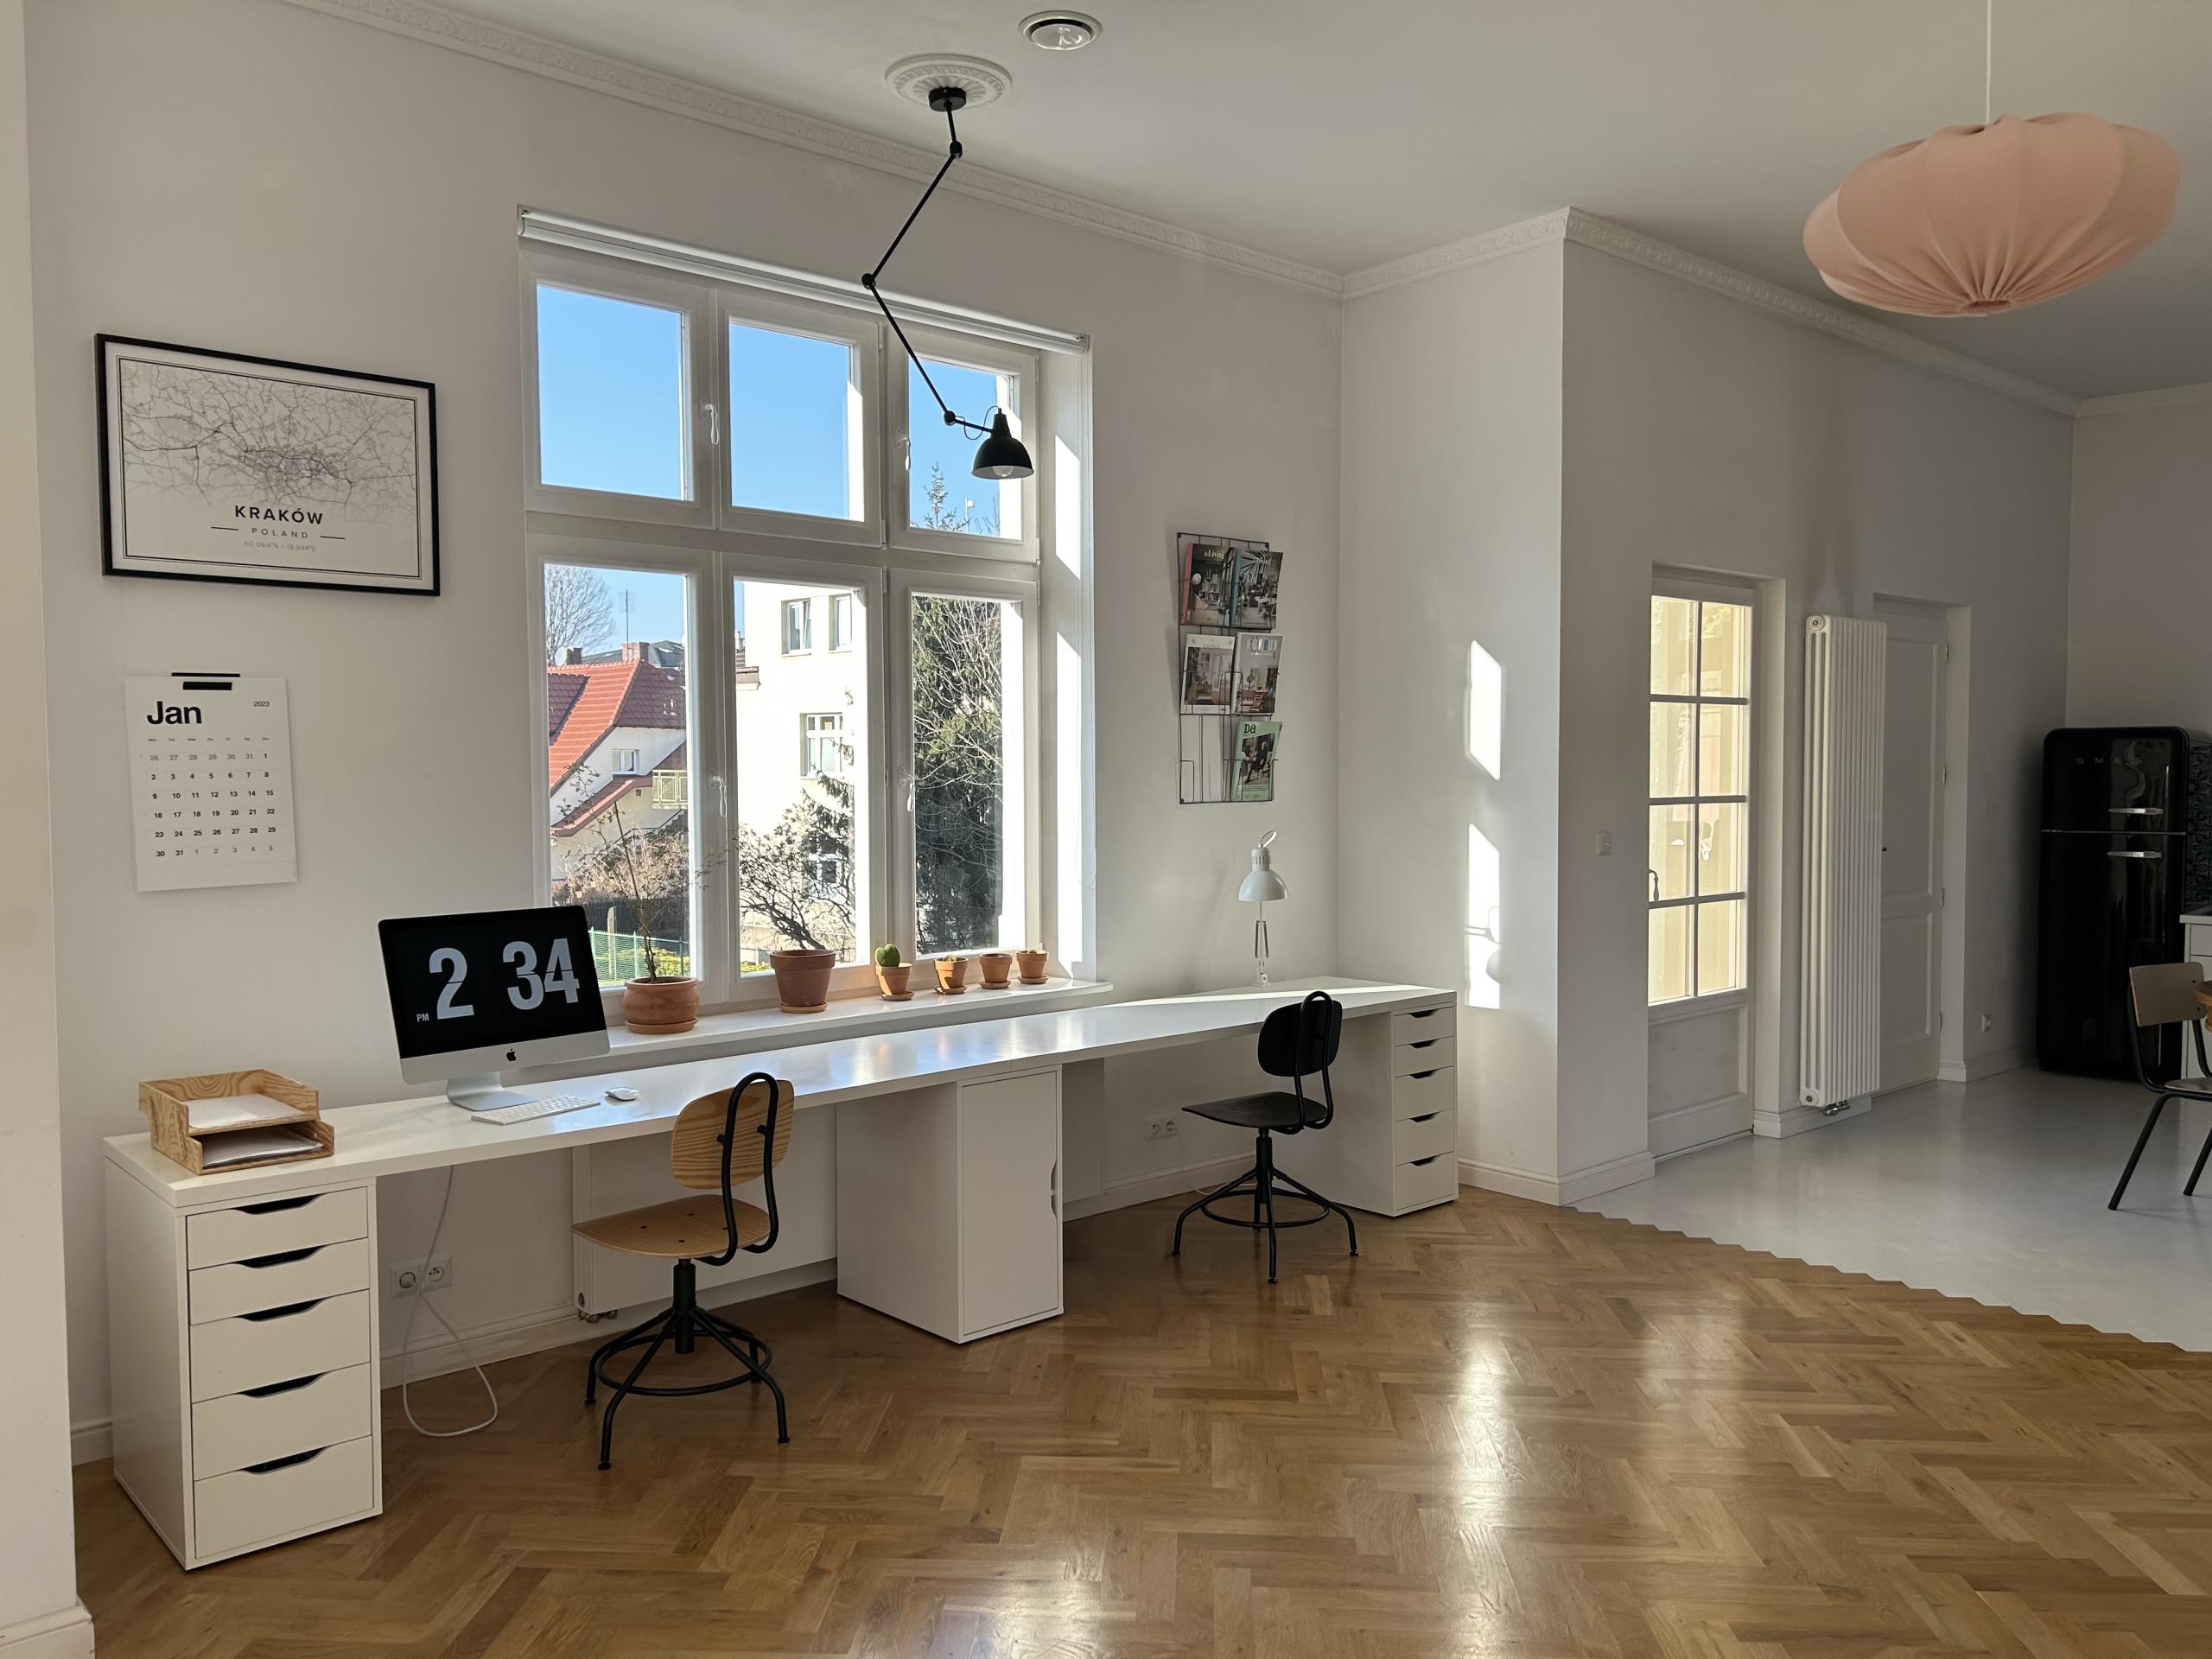 Office space for rent in a Villa near the University of Economics